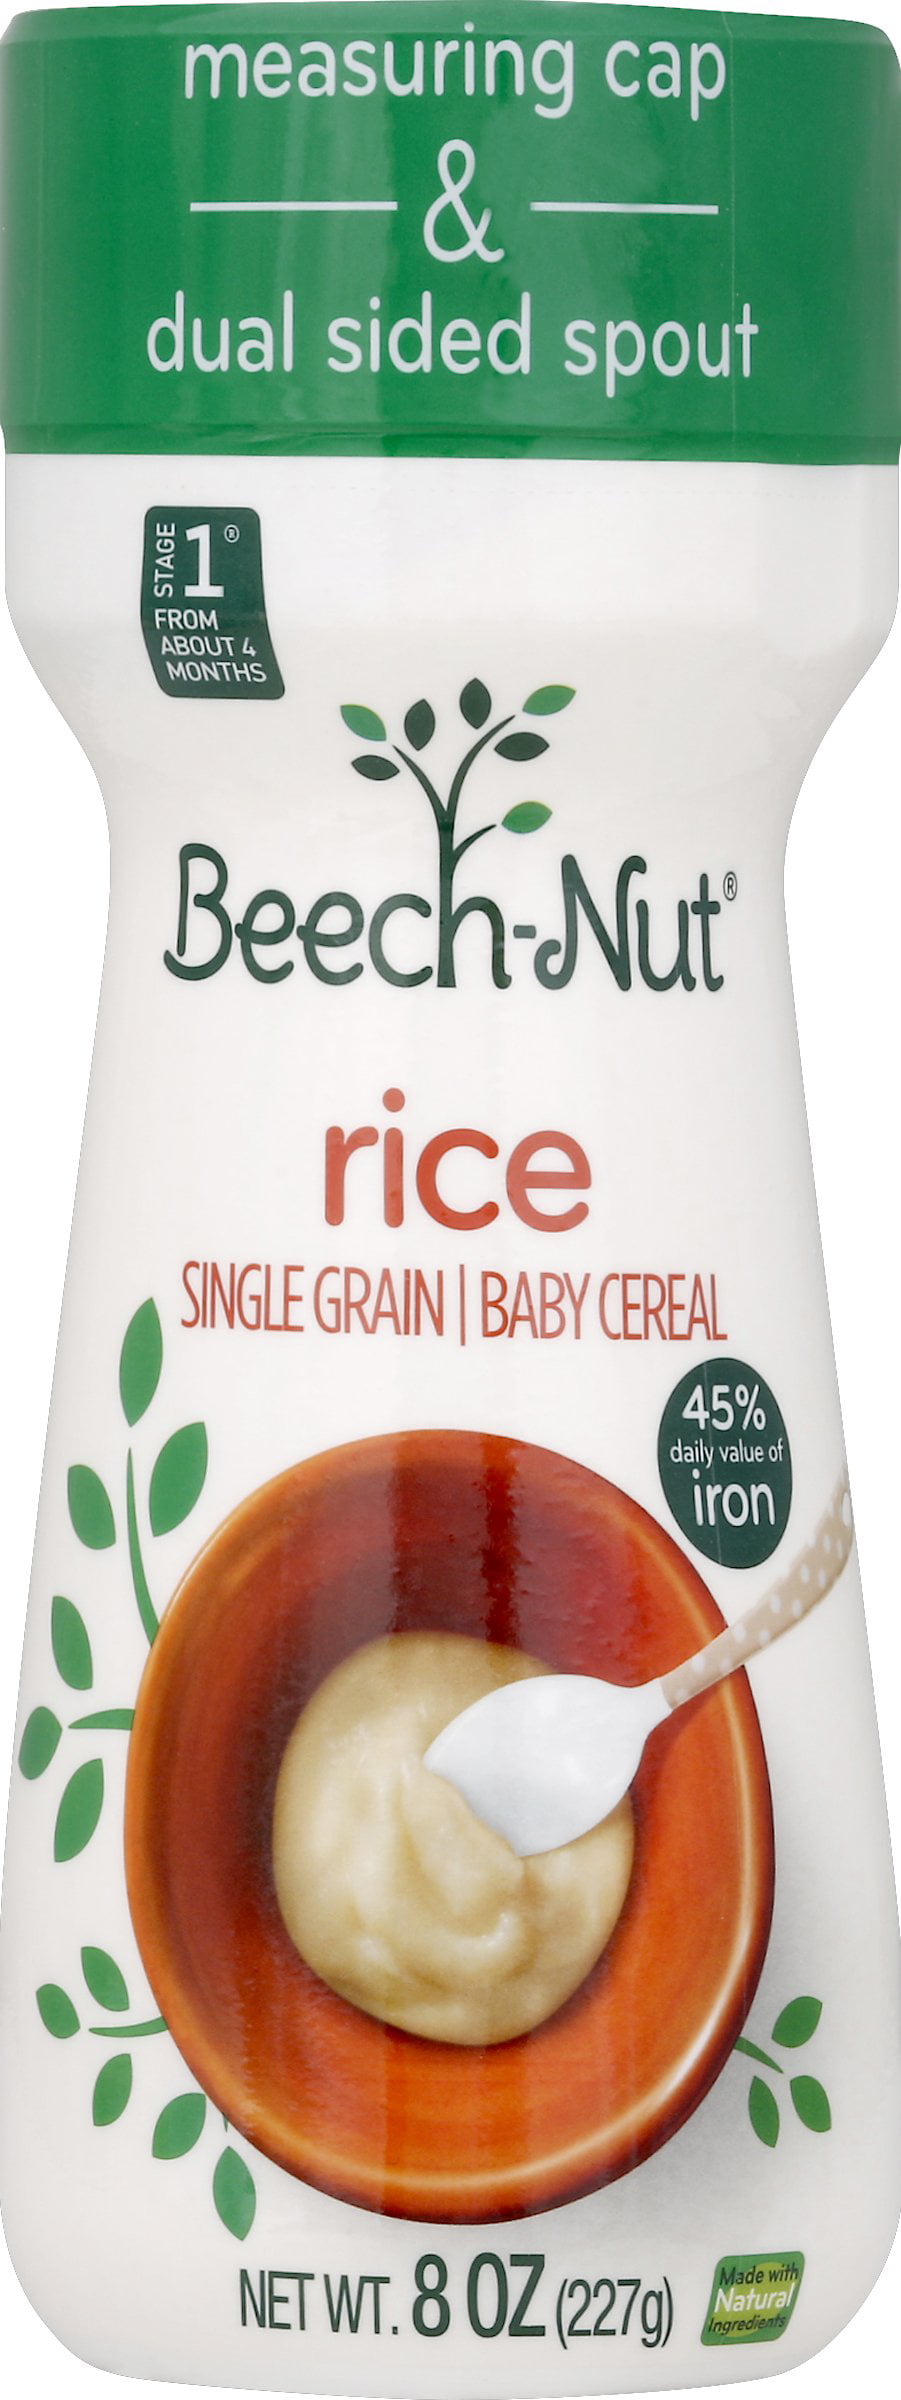 rice cereal for babies 4 months